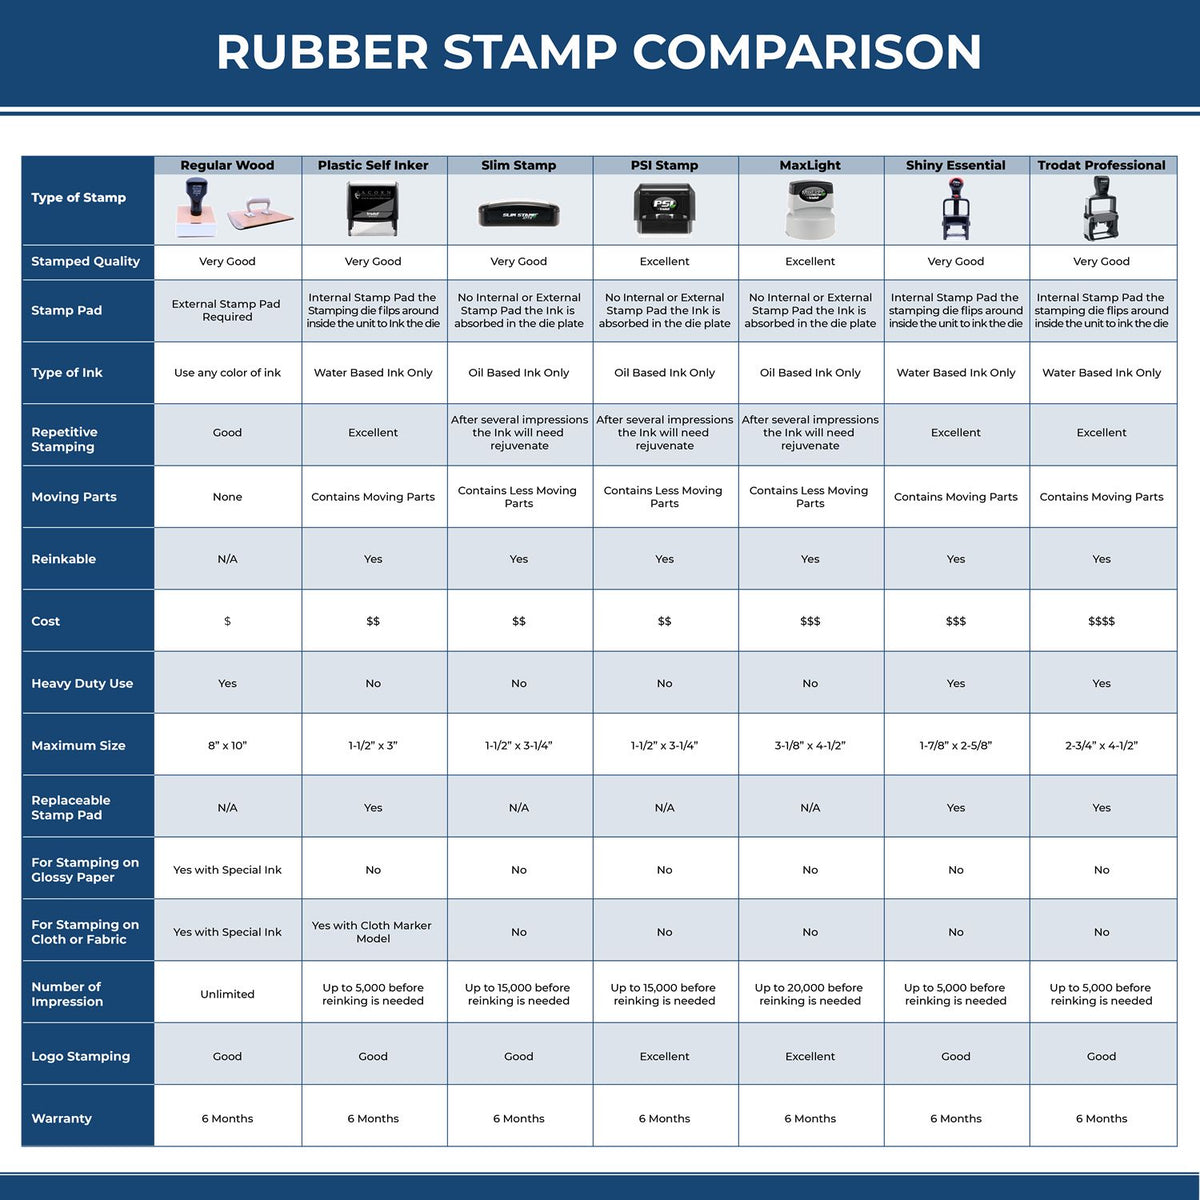 A comparison chart for the different types of mount models available for the MaxLight Premium Pre-Inked West Virginia State Seal Notarial Stamp.